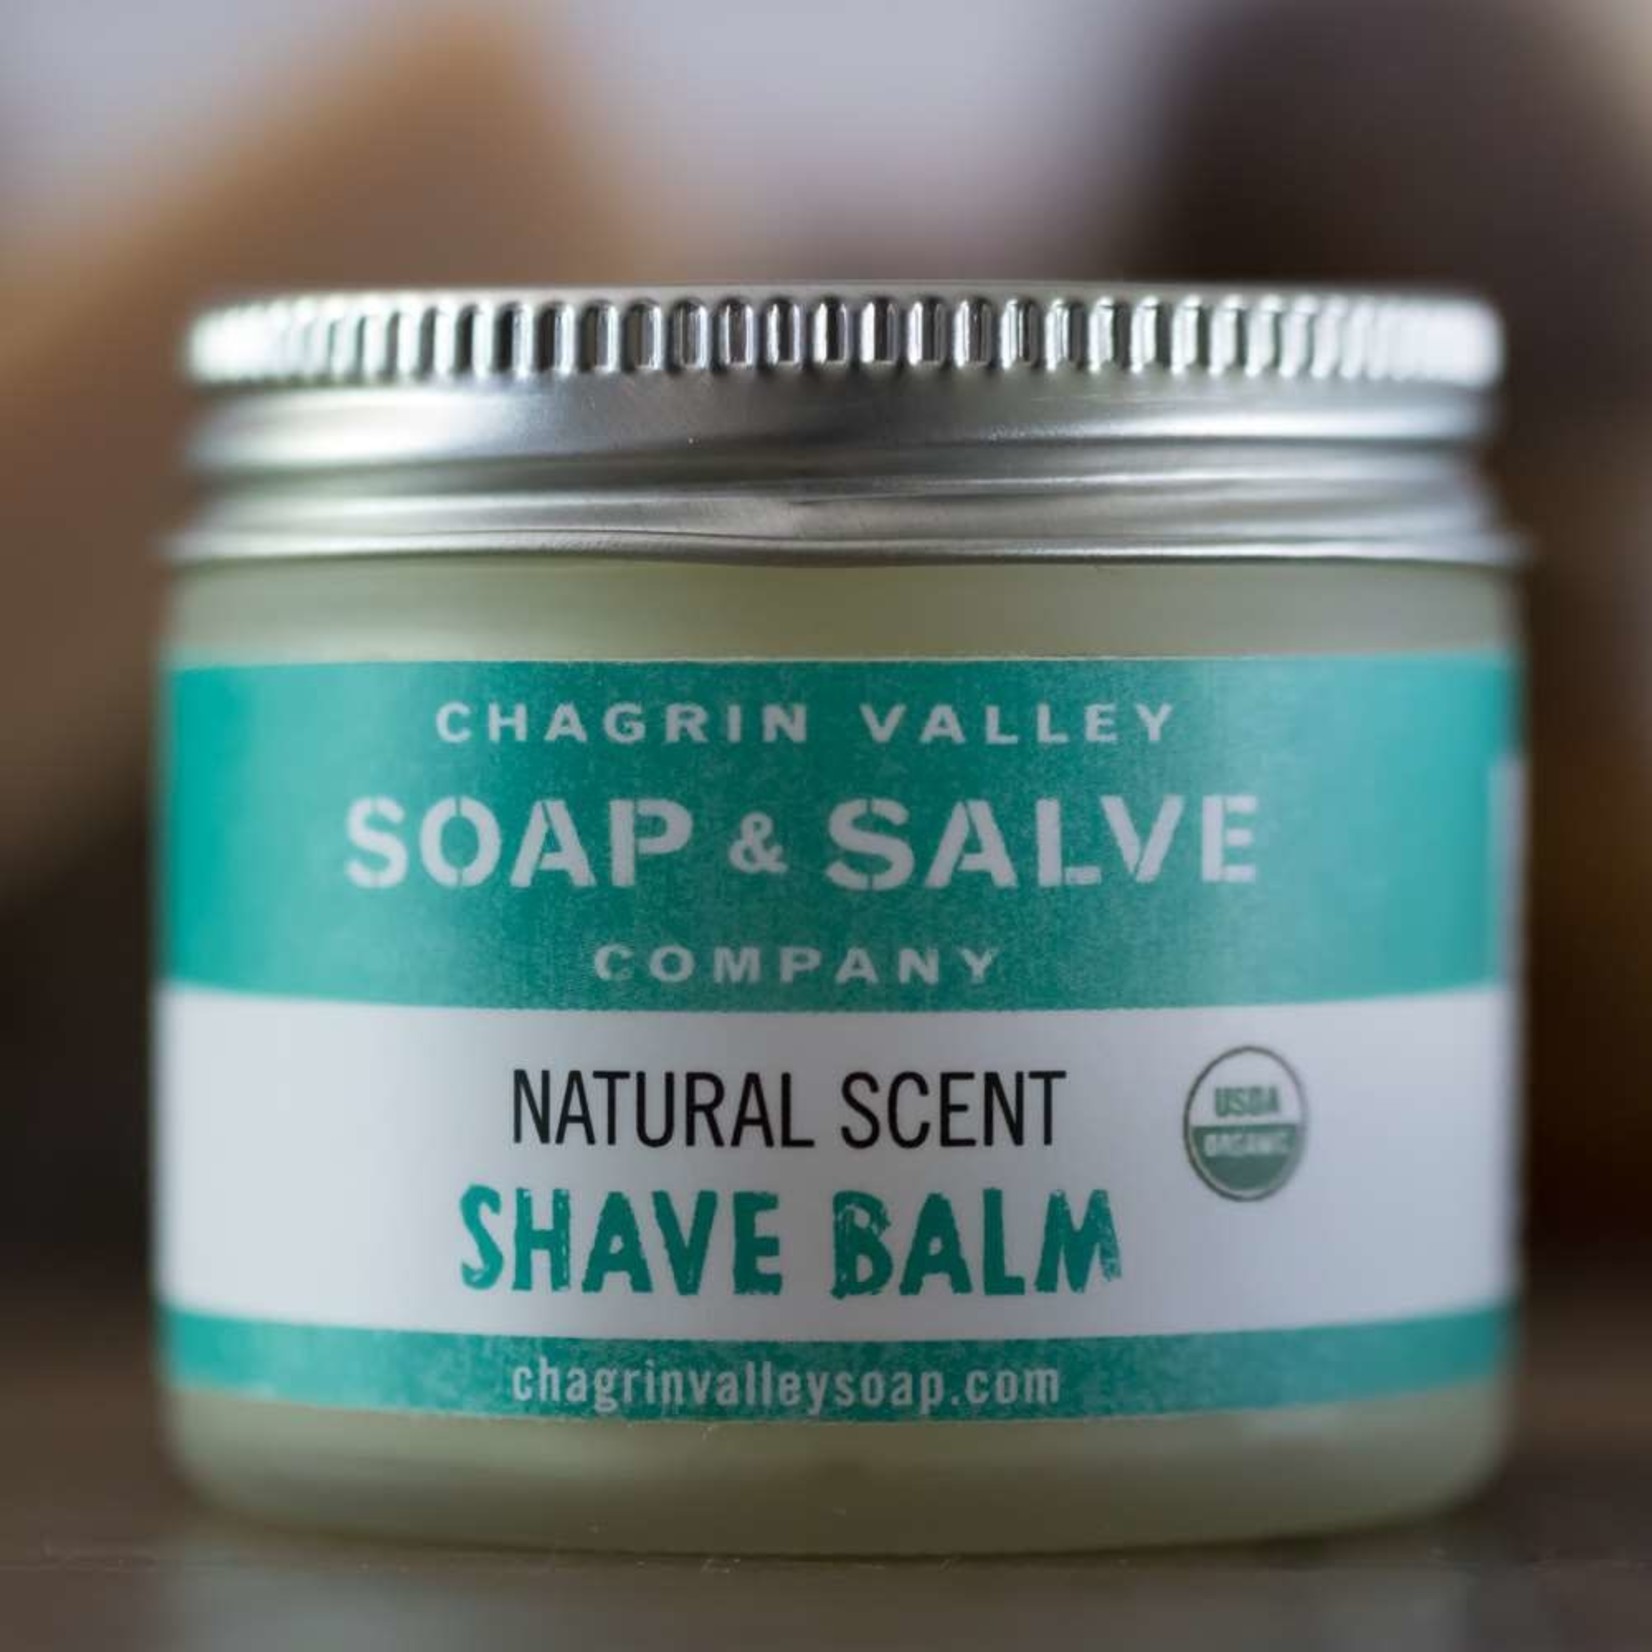 Chagrin Valley Soap and Salve Natural Scent Shave Balm 2.2oz Jar